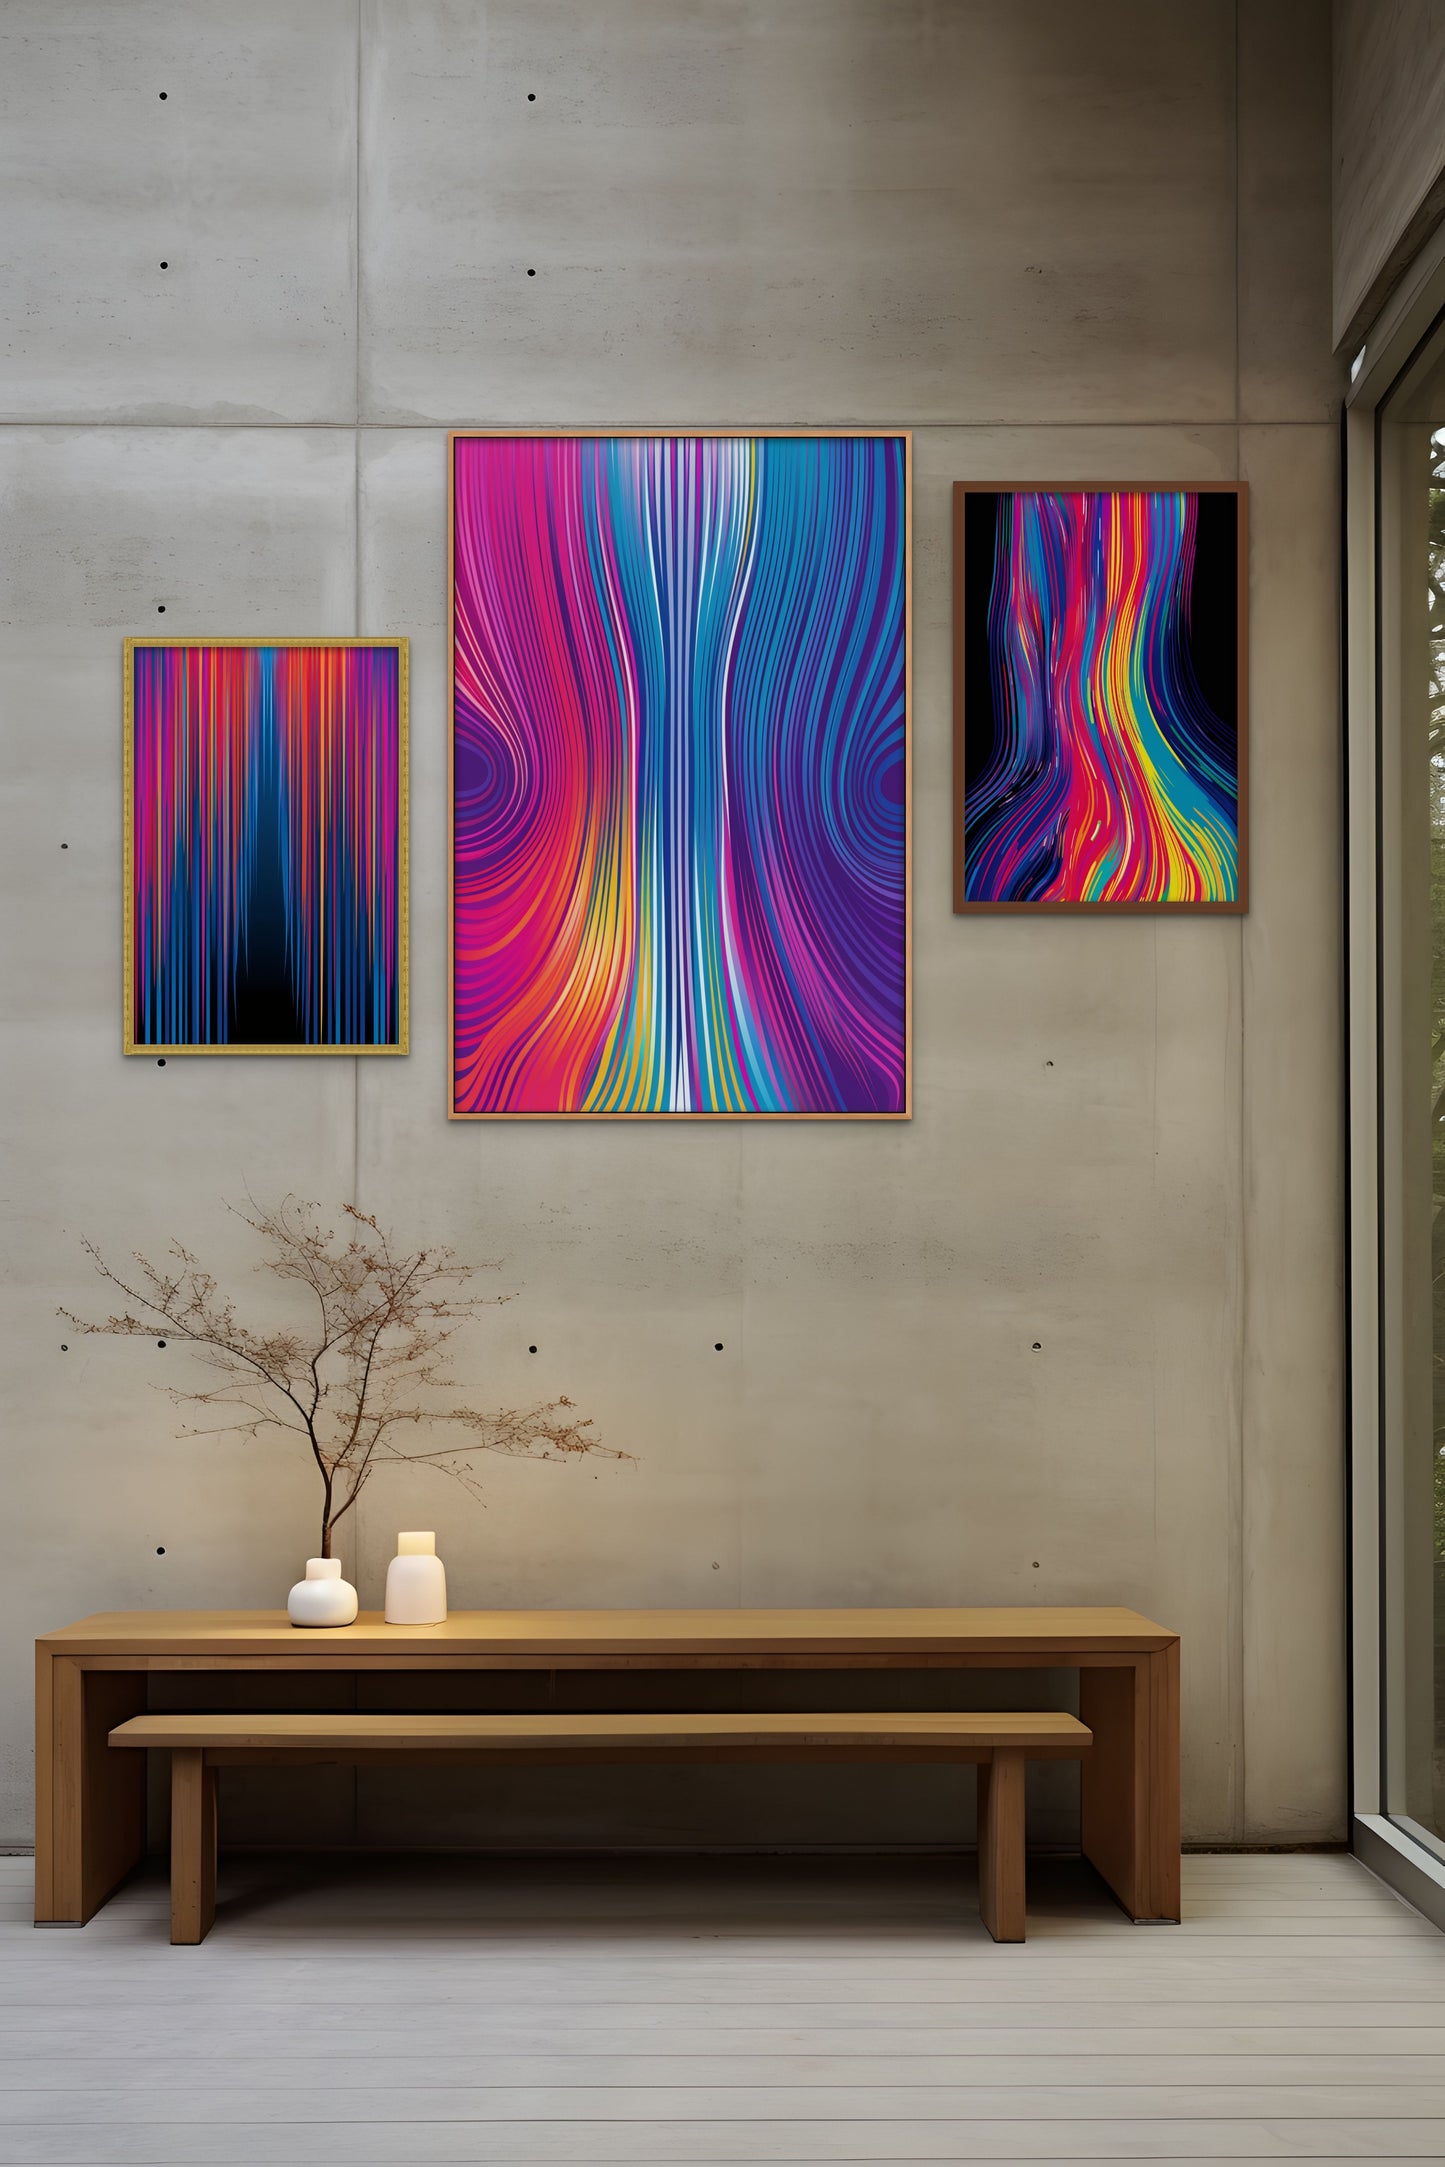 Three colorful abstract paintings displayed above a wooden bench with a vase and twig.